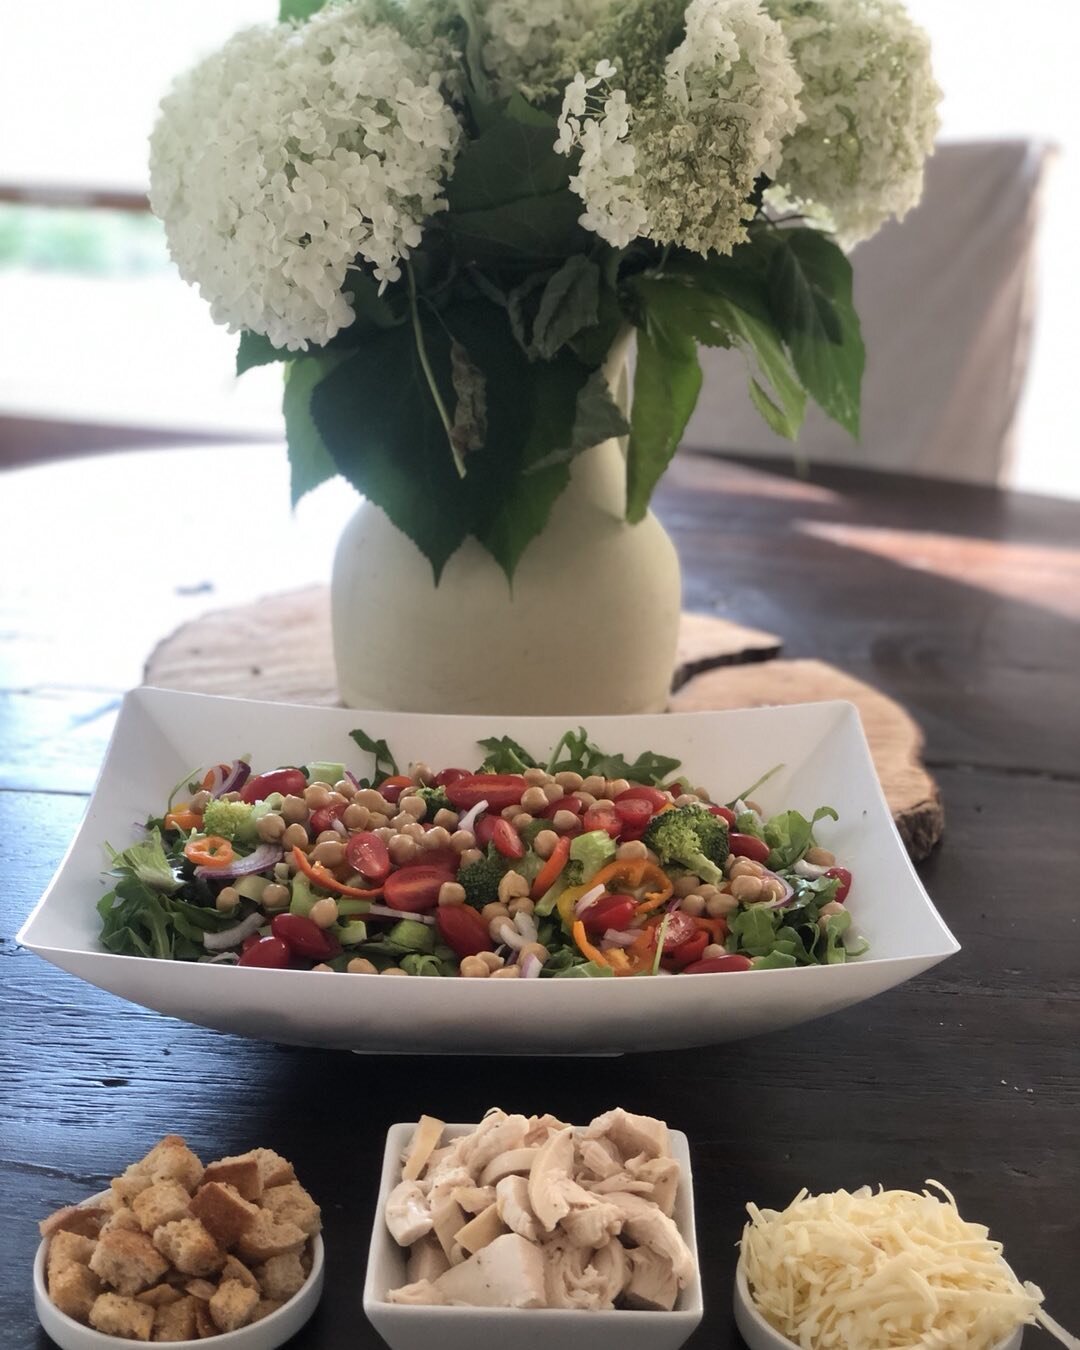 My customer asked to have a large salad, full of veggies with chicken and cheese on the side waiting for her and her family after a long day of traveling. I added homemade croutons. I think I nailed it!  #tastemvt #homemadefood #fooddelivery #vermont